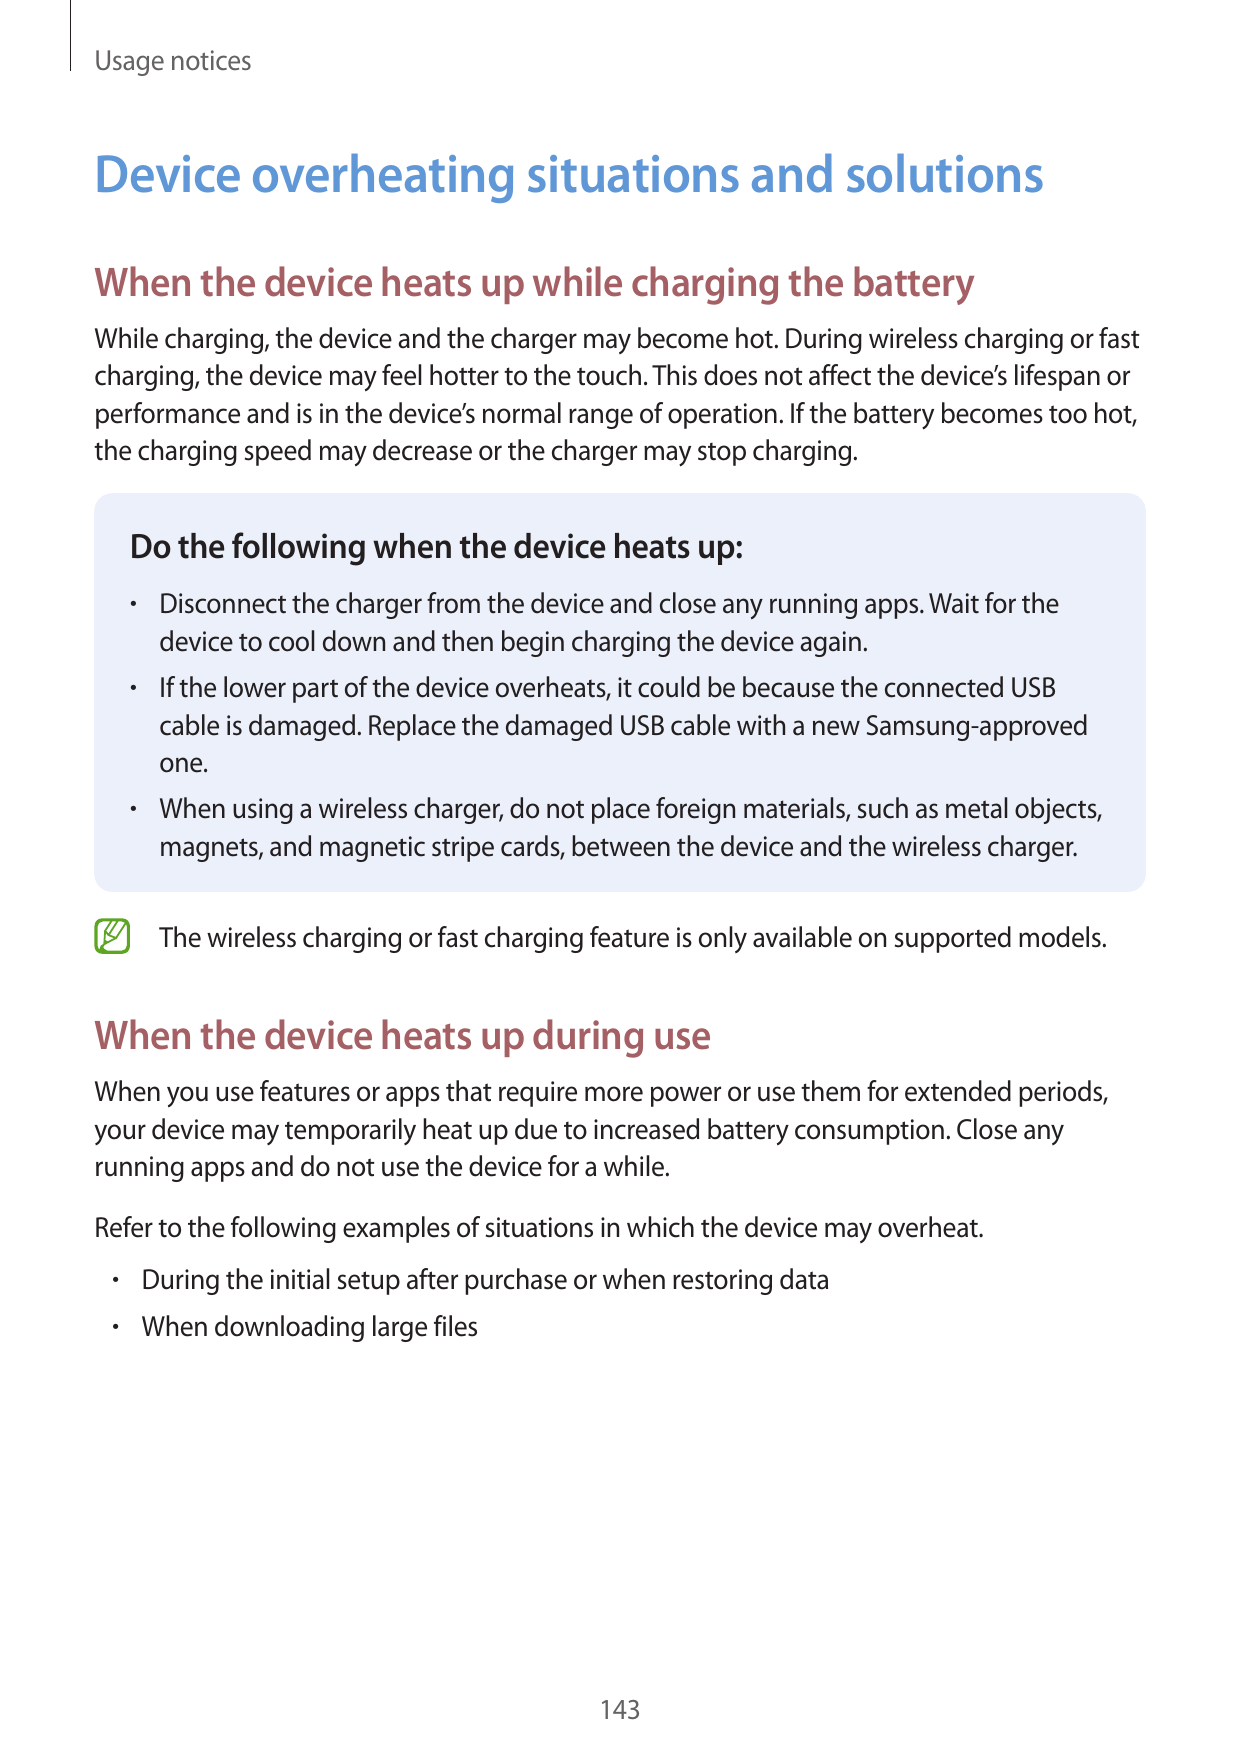 Usage noticesDevice overheating situations and solutionsWhen the device heats up while charging the batteryWhile charging, the d